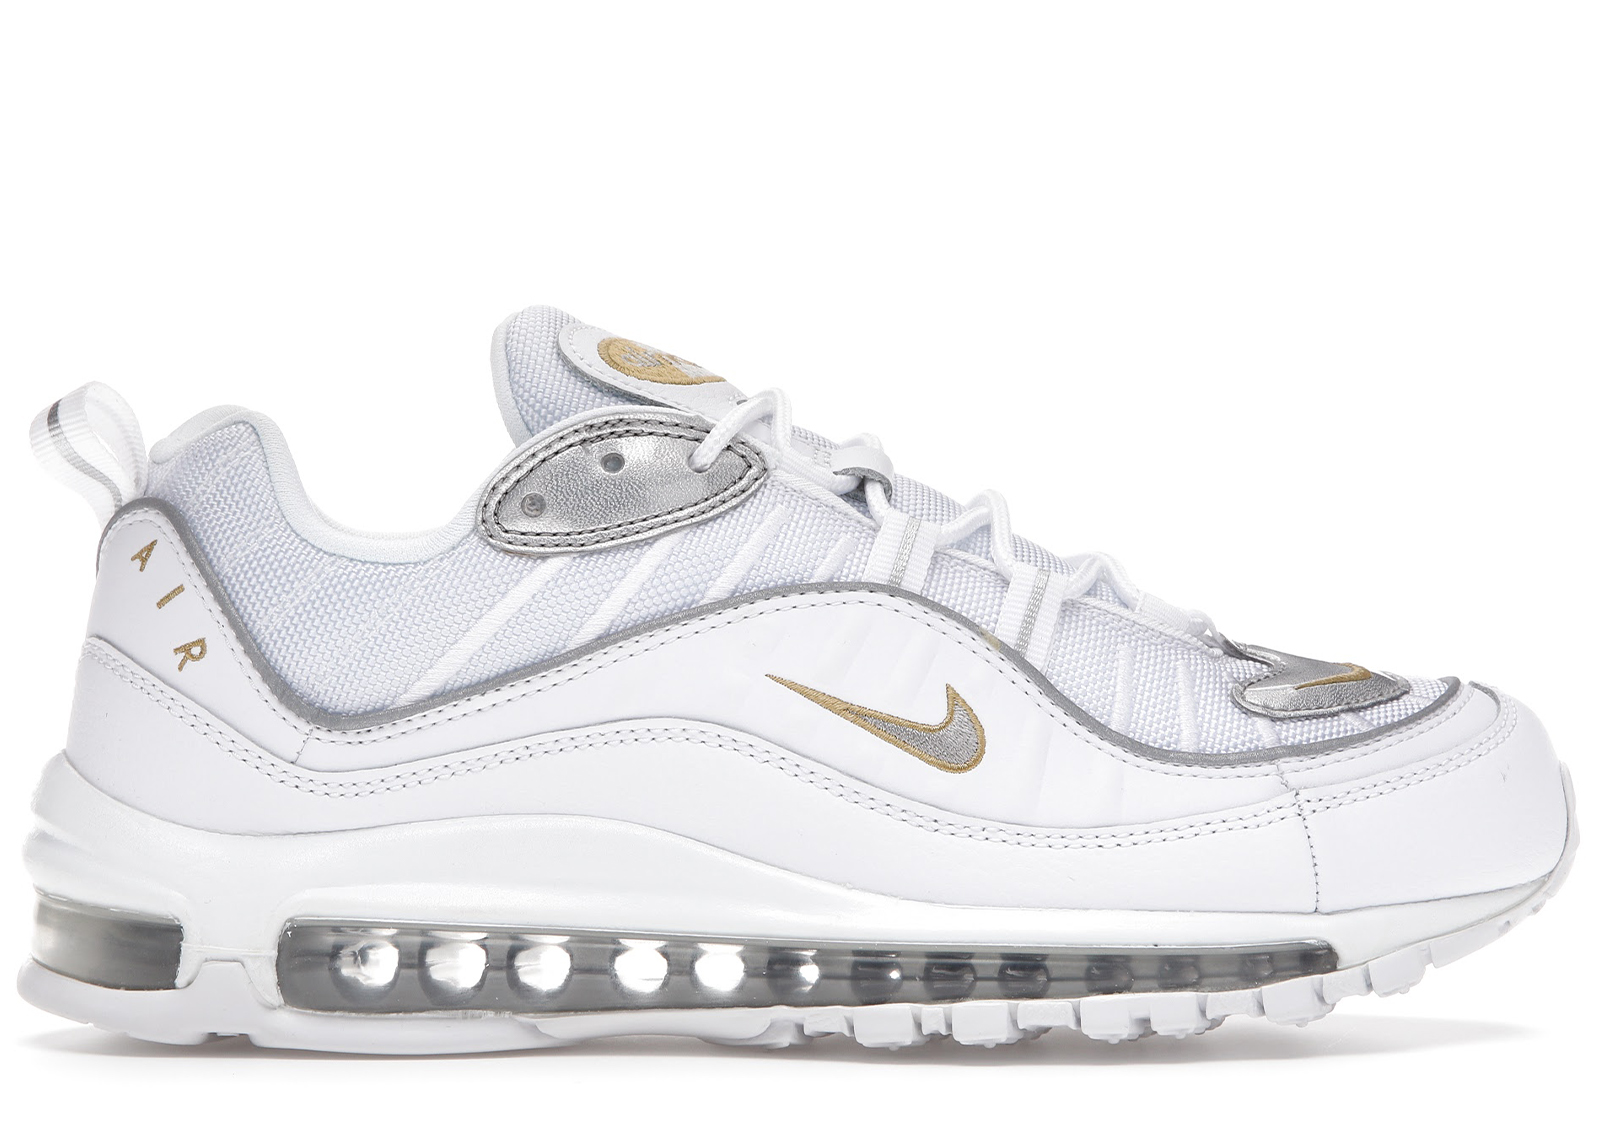 nike gold silver